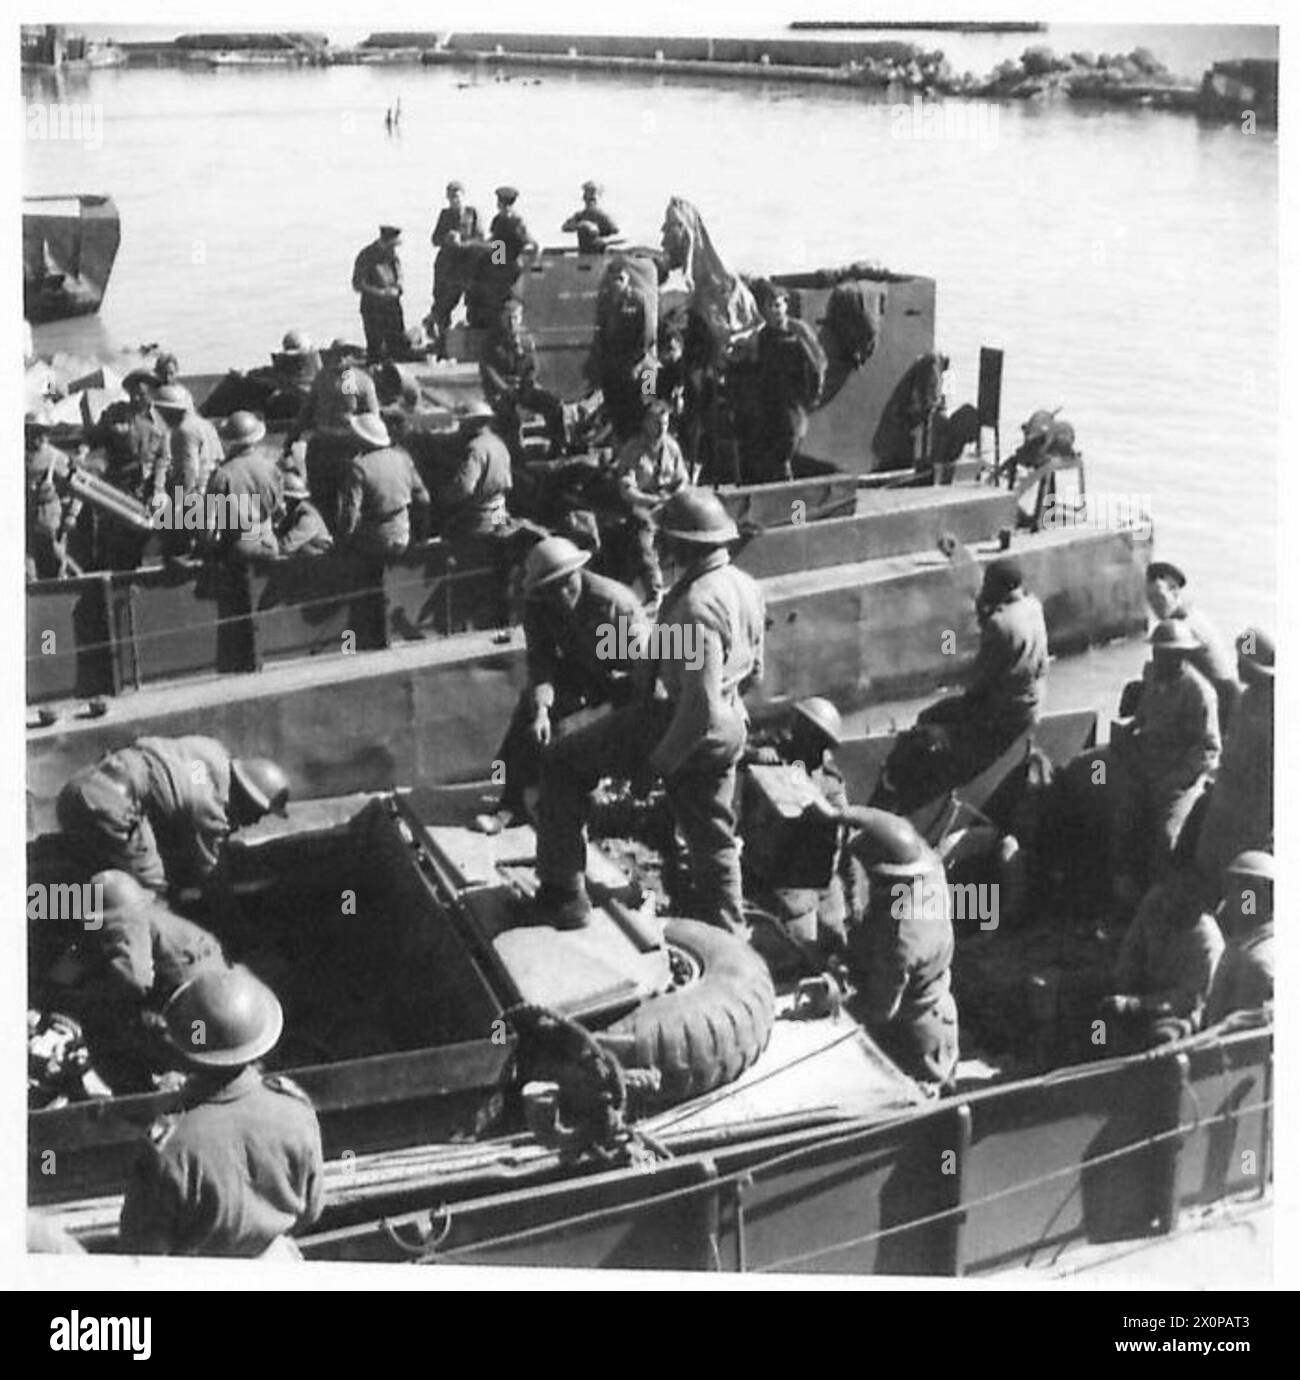 FIFTH ARMY : ANZIO BRIDGEHEAD.SOUTH AFRICAN COLOURED TROOPS AT ANZIO - Swazi troops loading a Duck which has been backed on to a landing craft, which in turn was loaded out at sea from a Liberty ship. Photographic negative , British Army Stock Photo